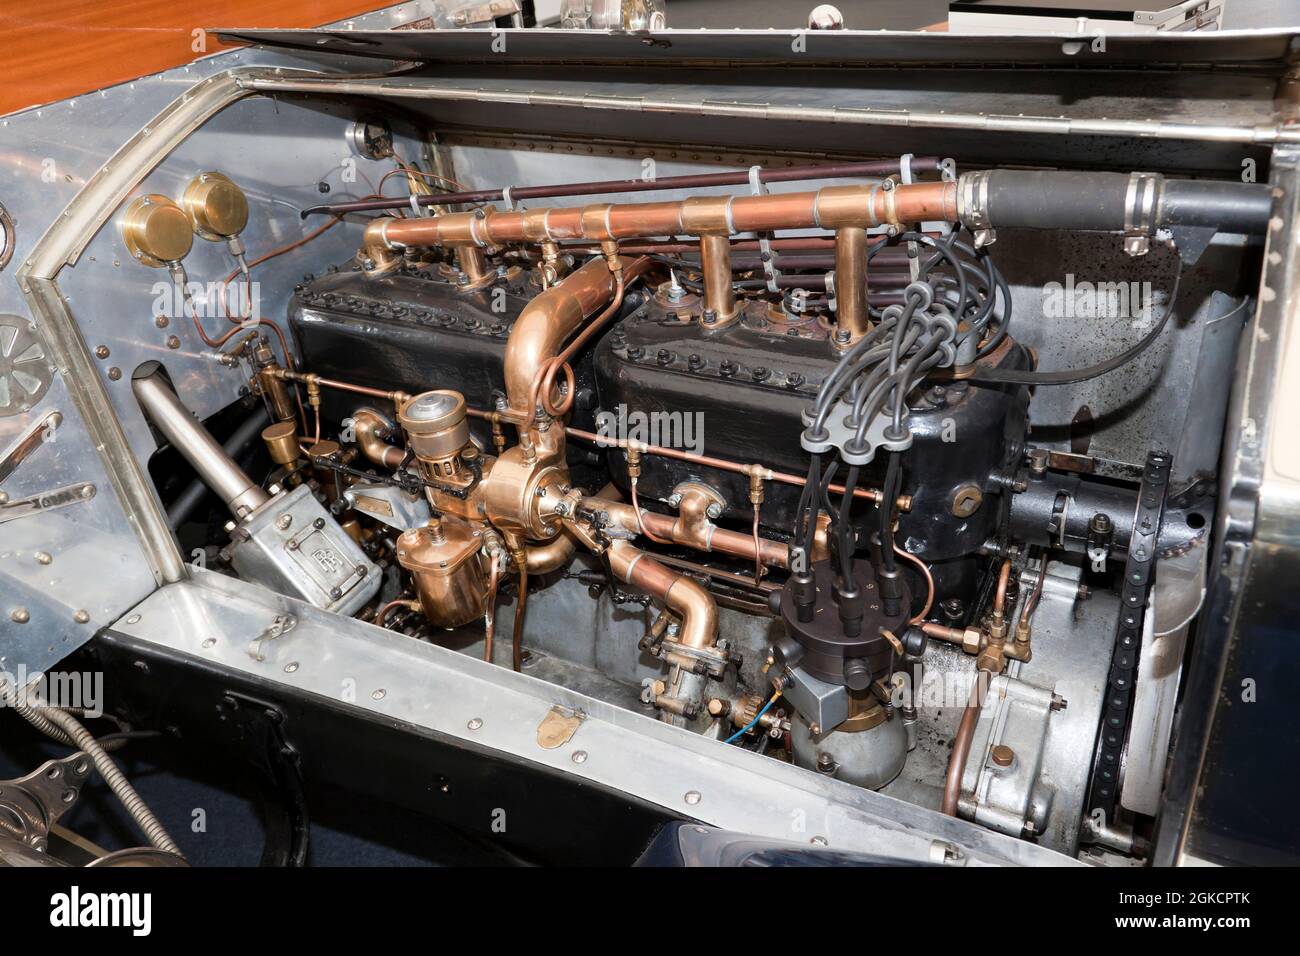 Close-up of a 7.4 liter, 6 cylinder  Rolls Royce  Silver Ghost Engine, on display, at the 2021 London Classic Car Show Stock Photo